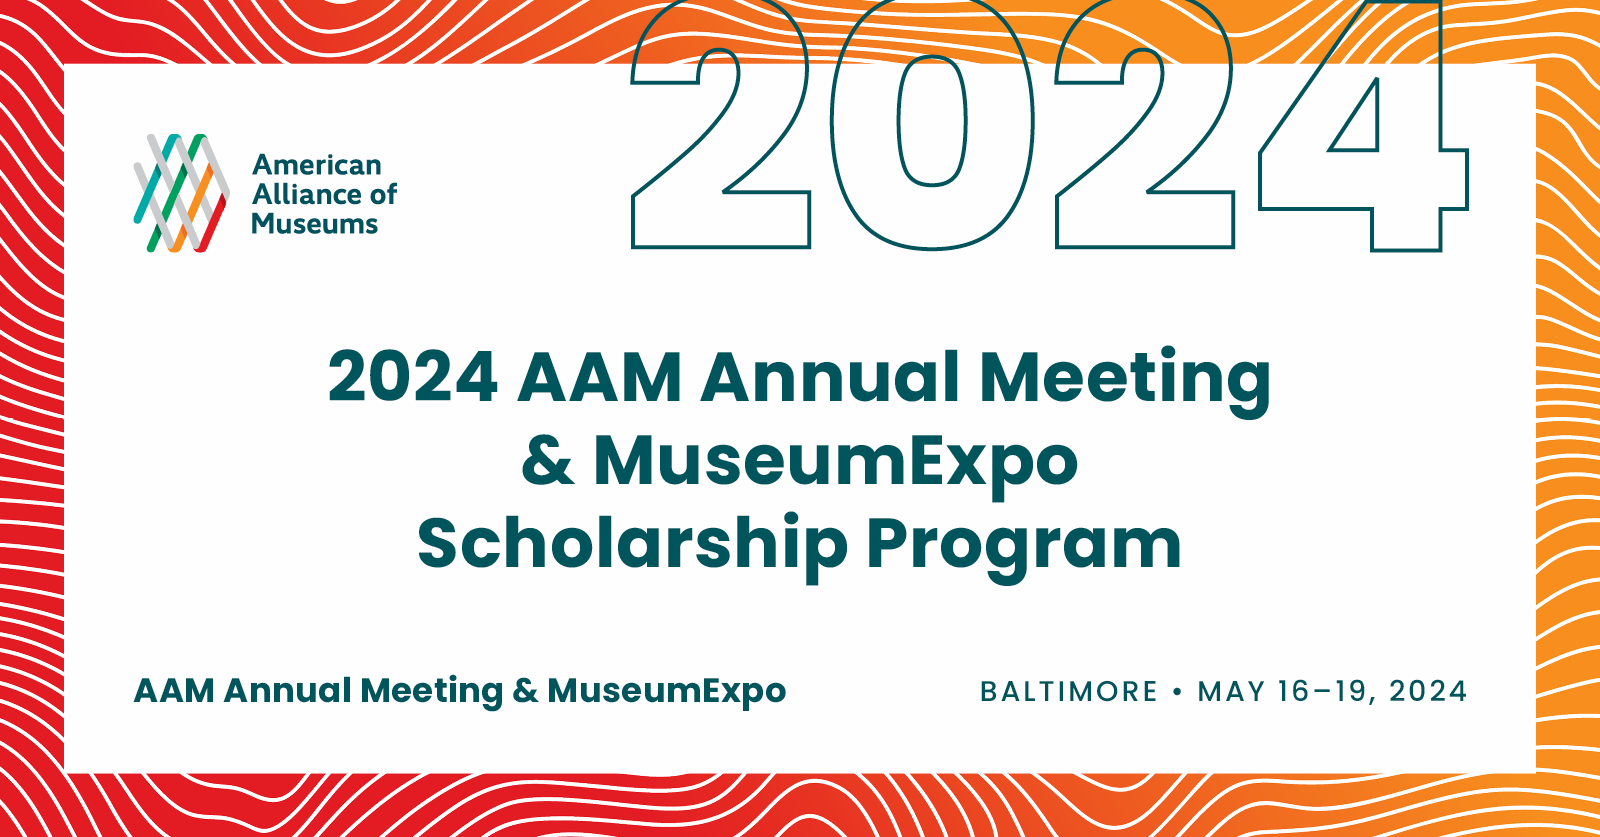 2024 Annual Meeting & MuseumExpo Open Call for Proposals